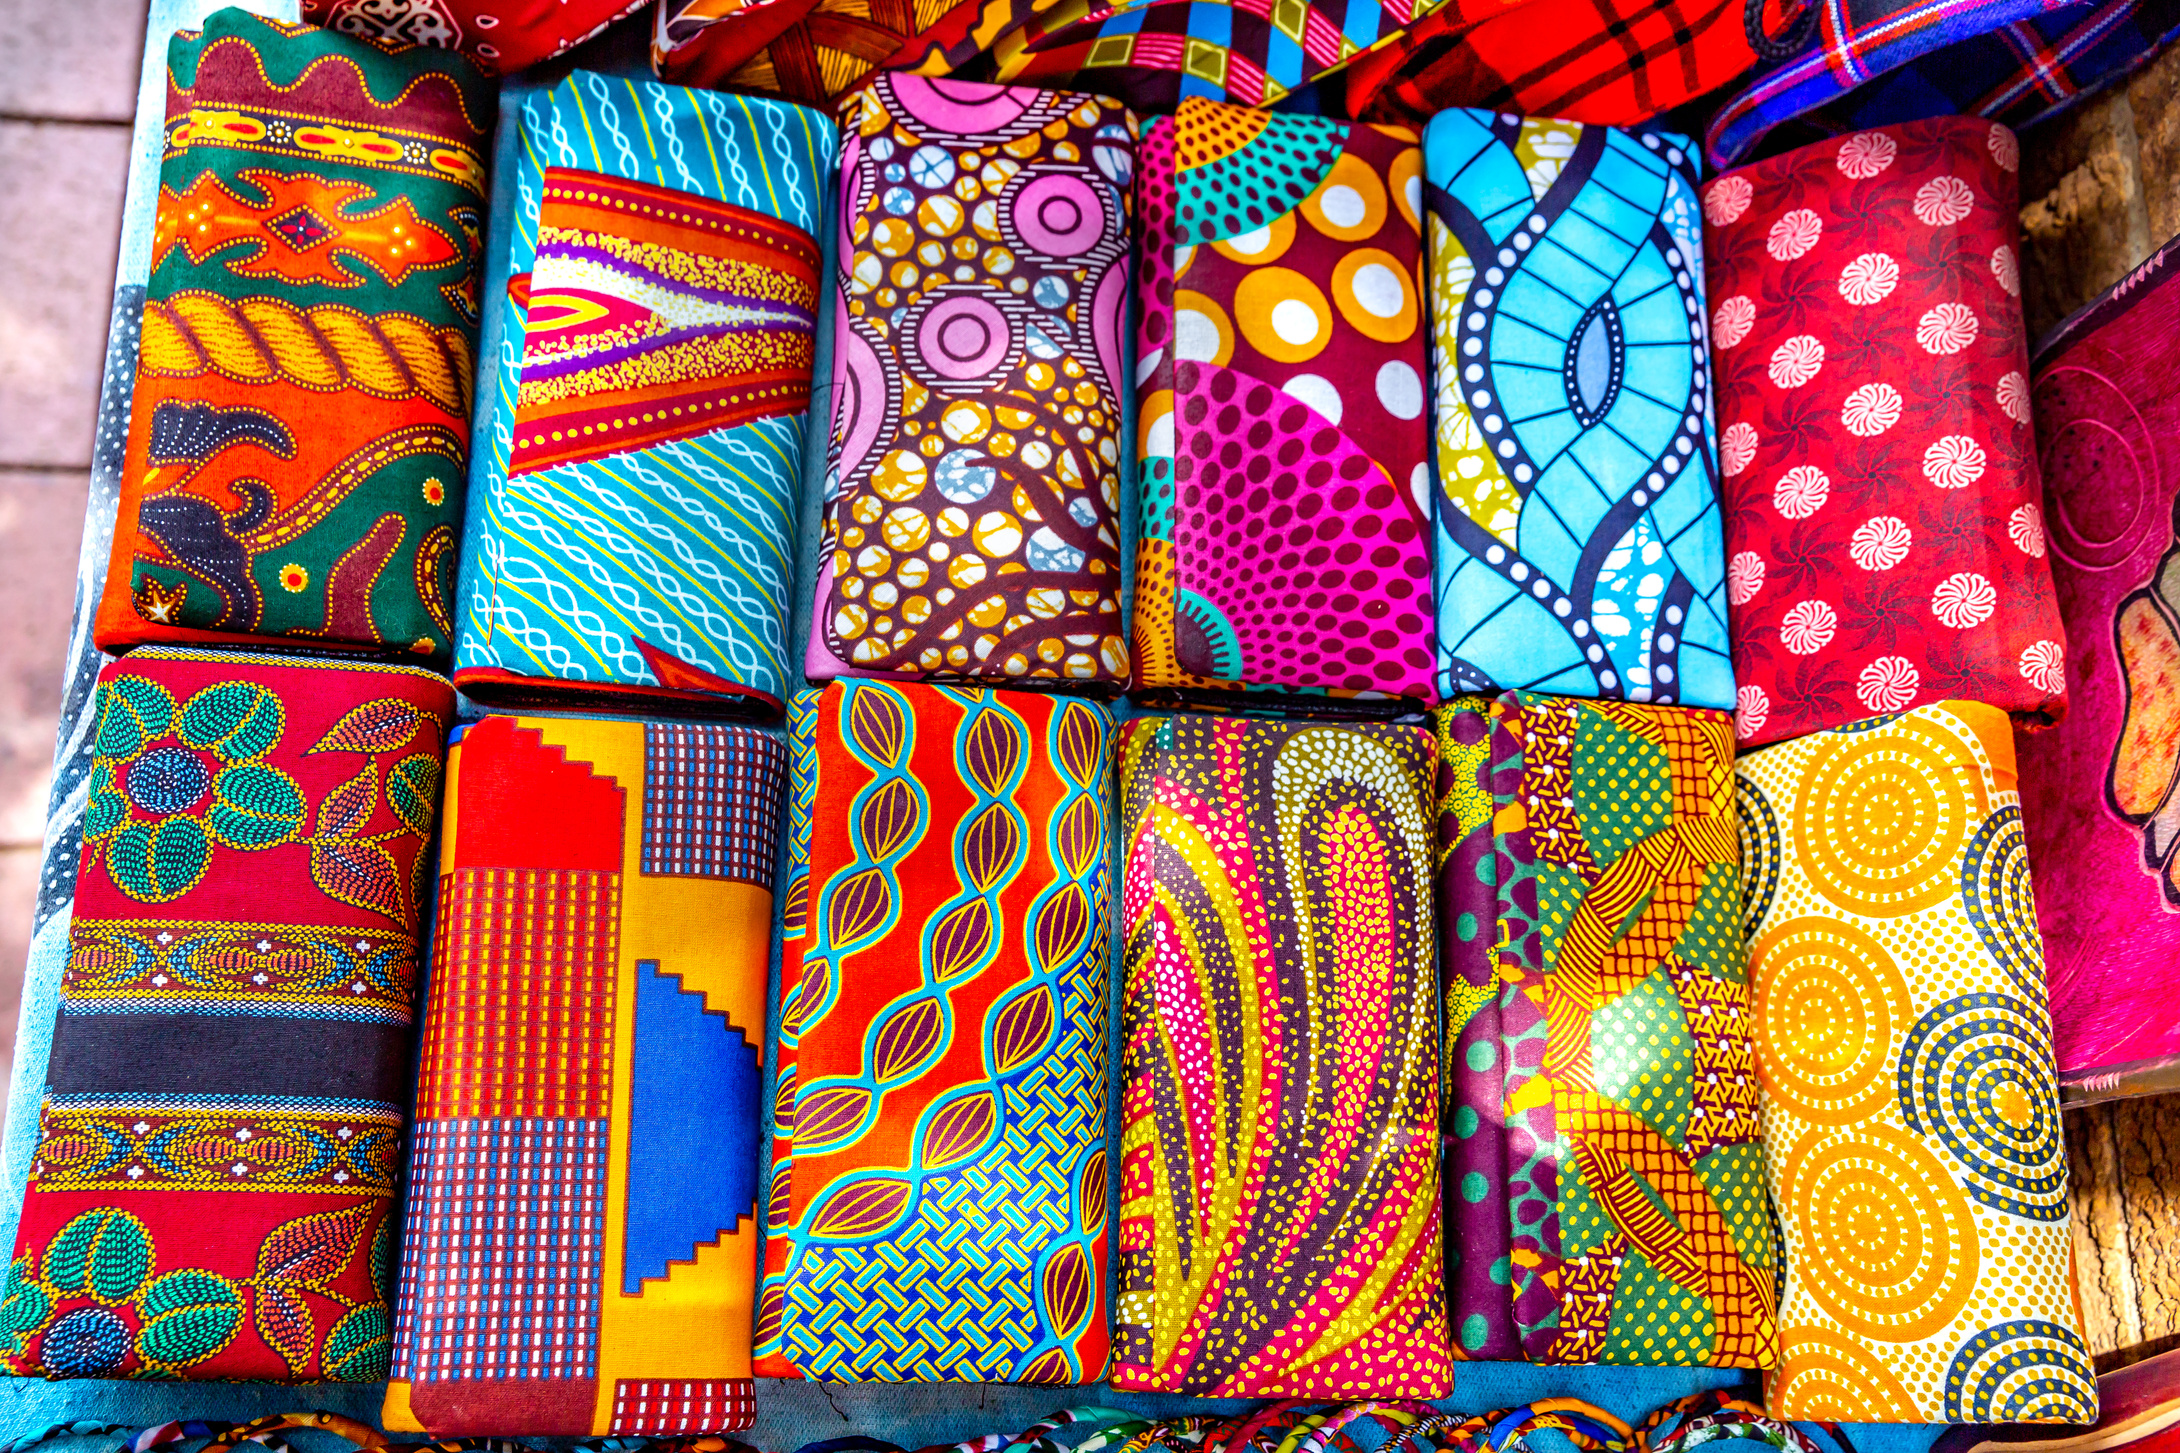 Colorful African cloths in street market, Africa